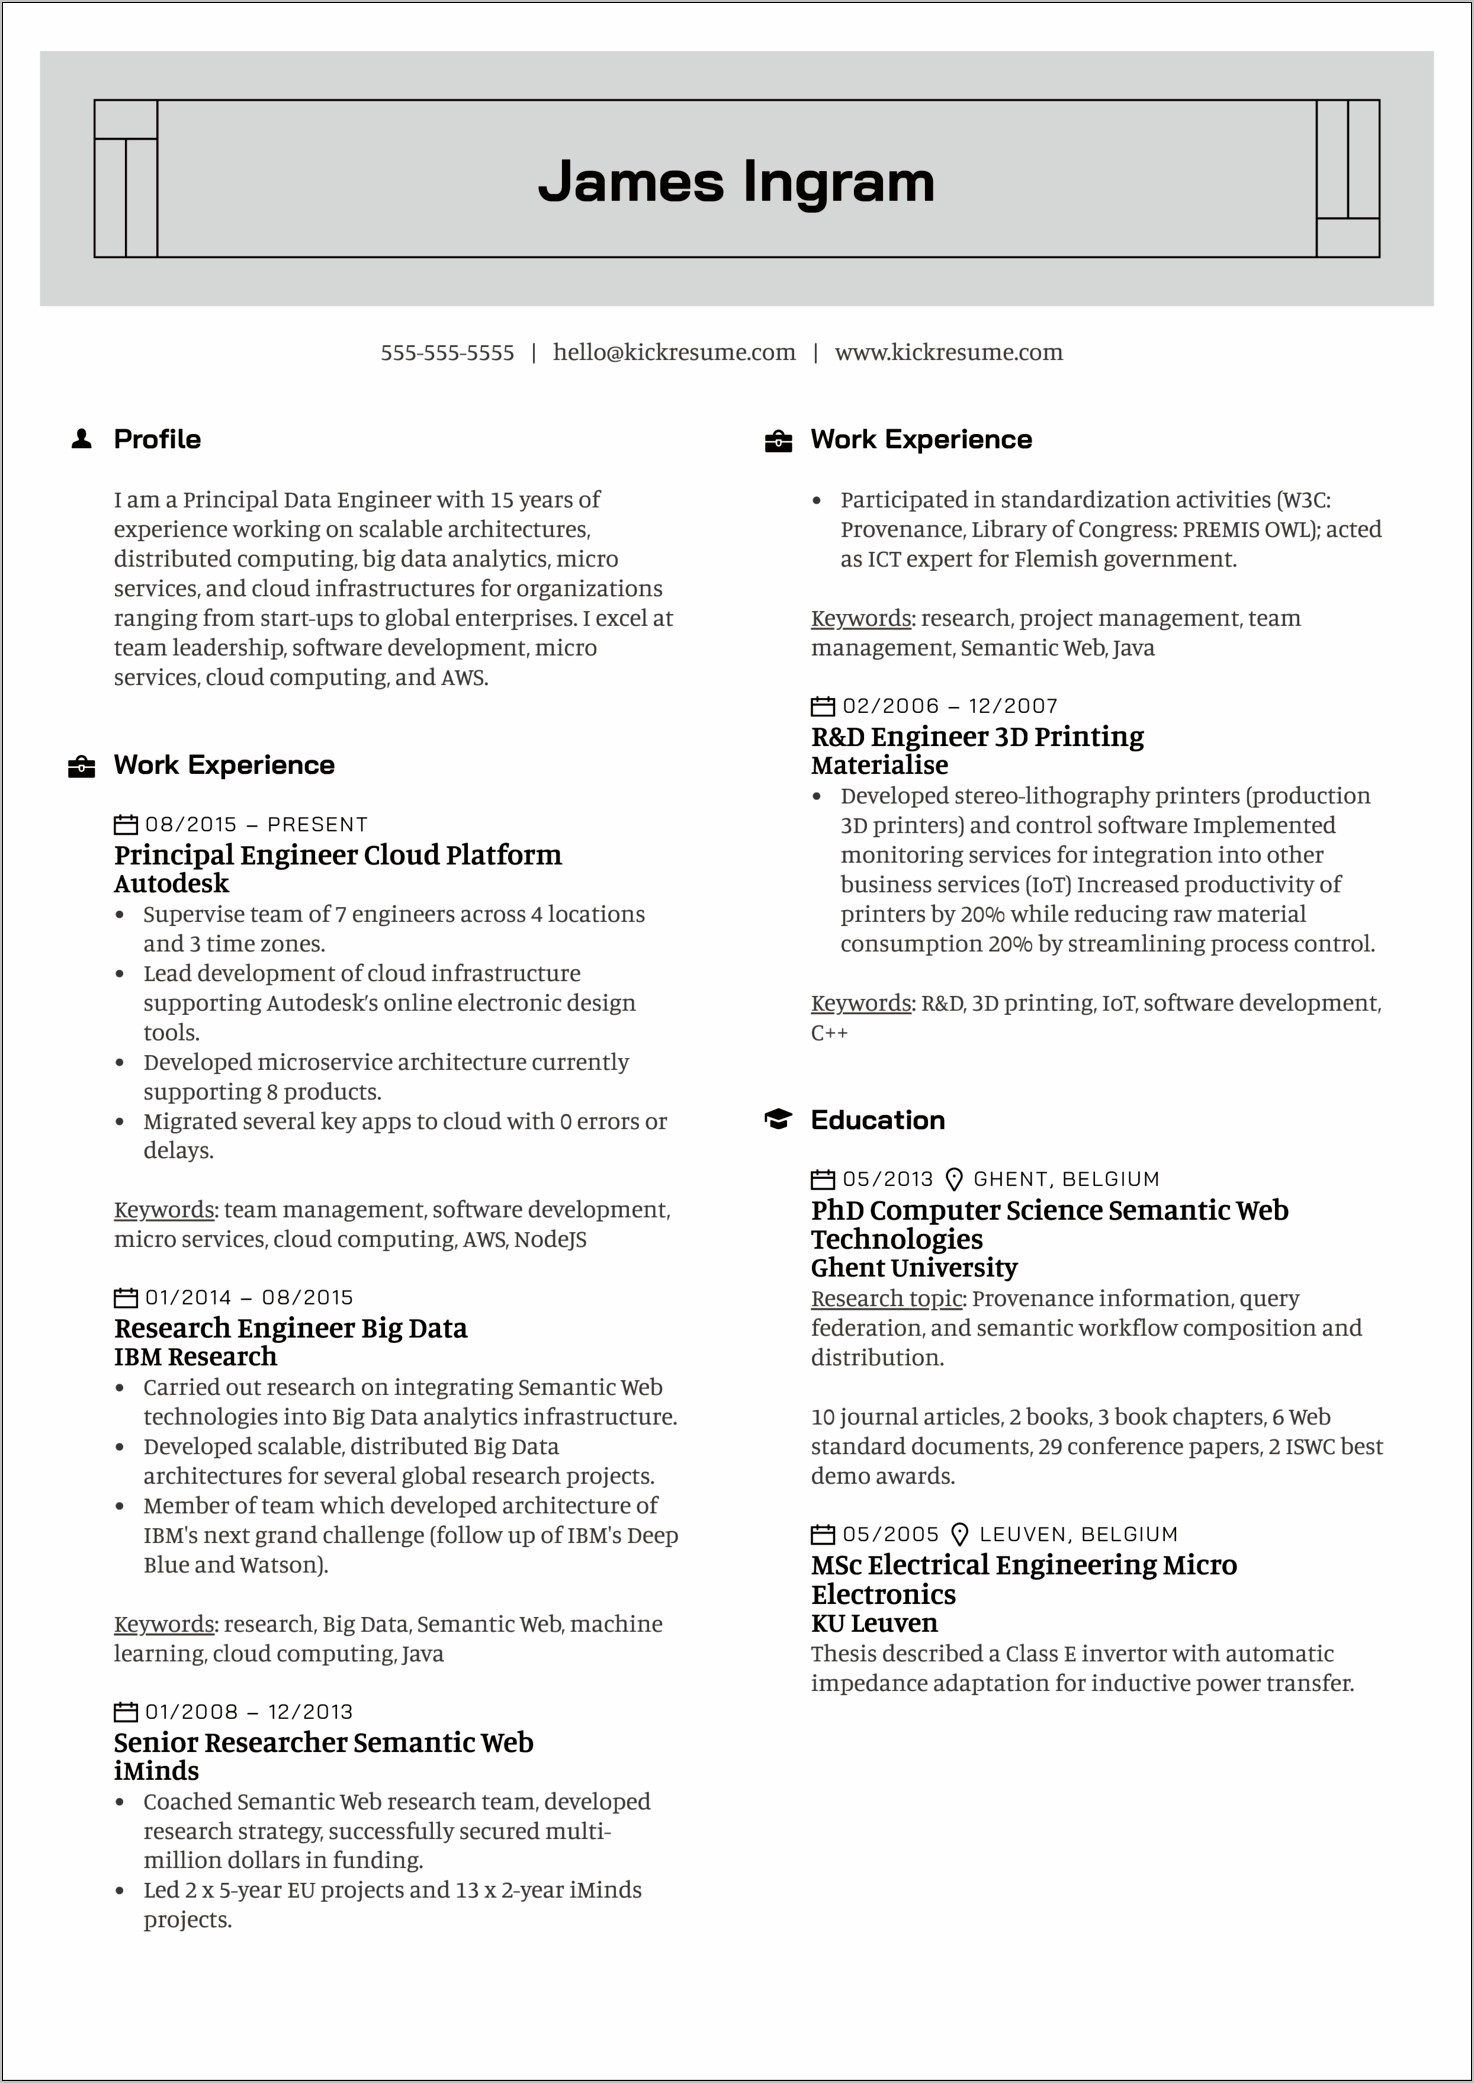 5 Year Experience Resume Format For Developer